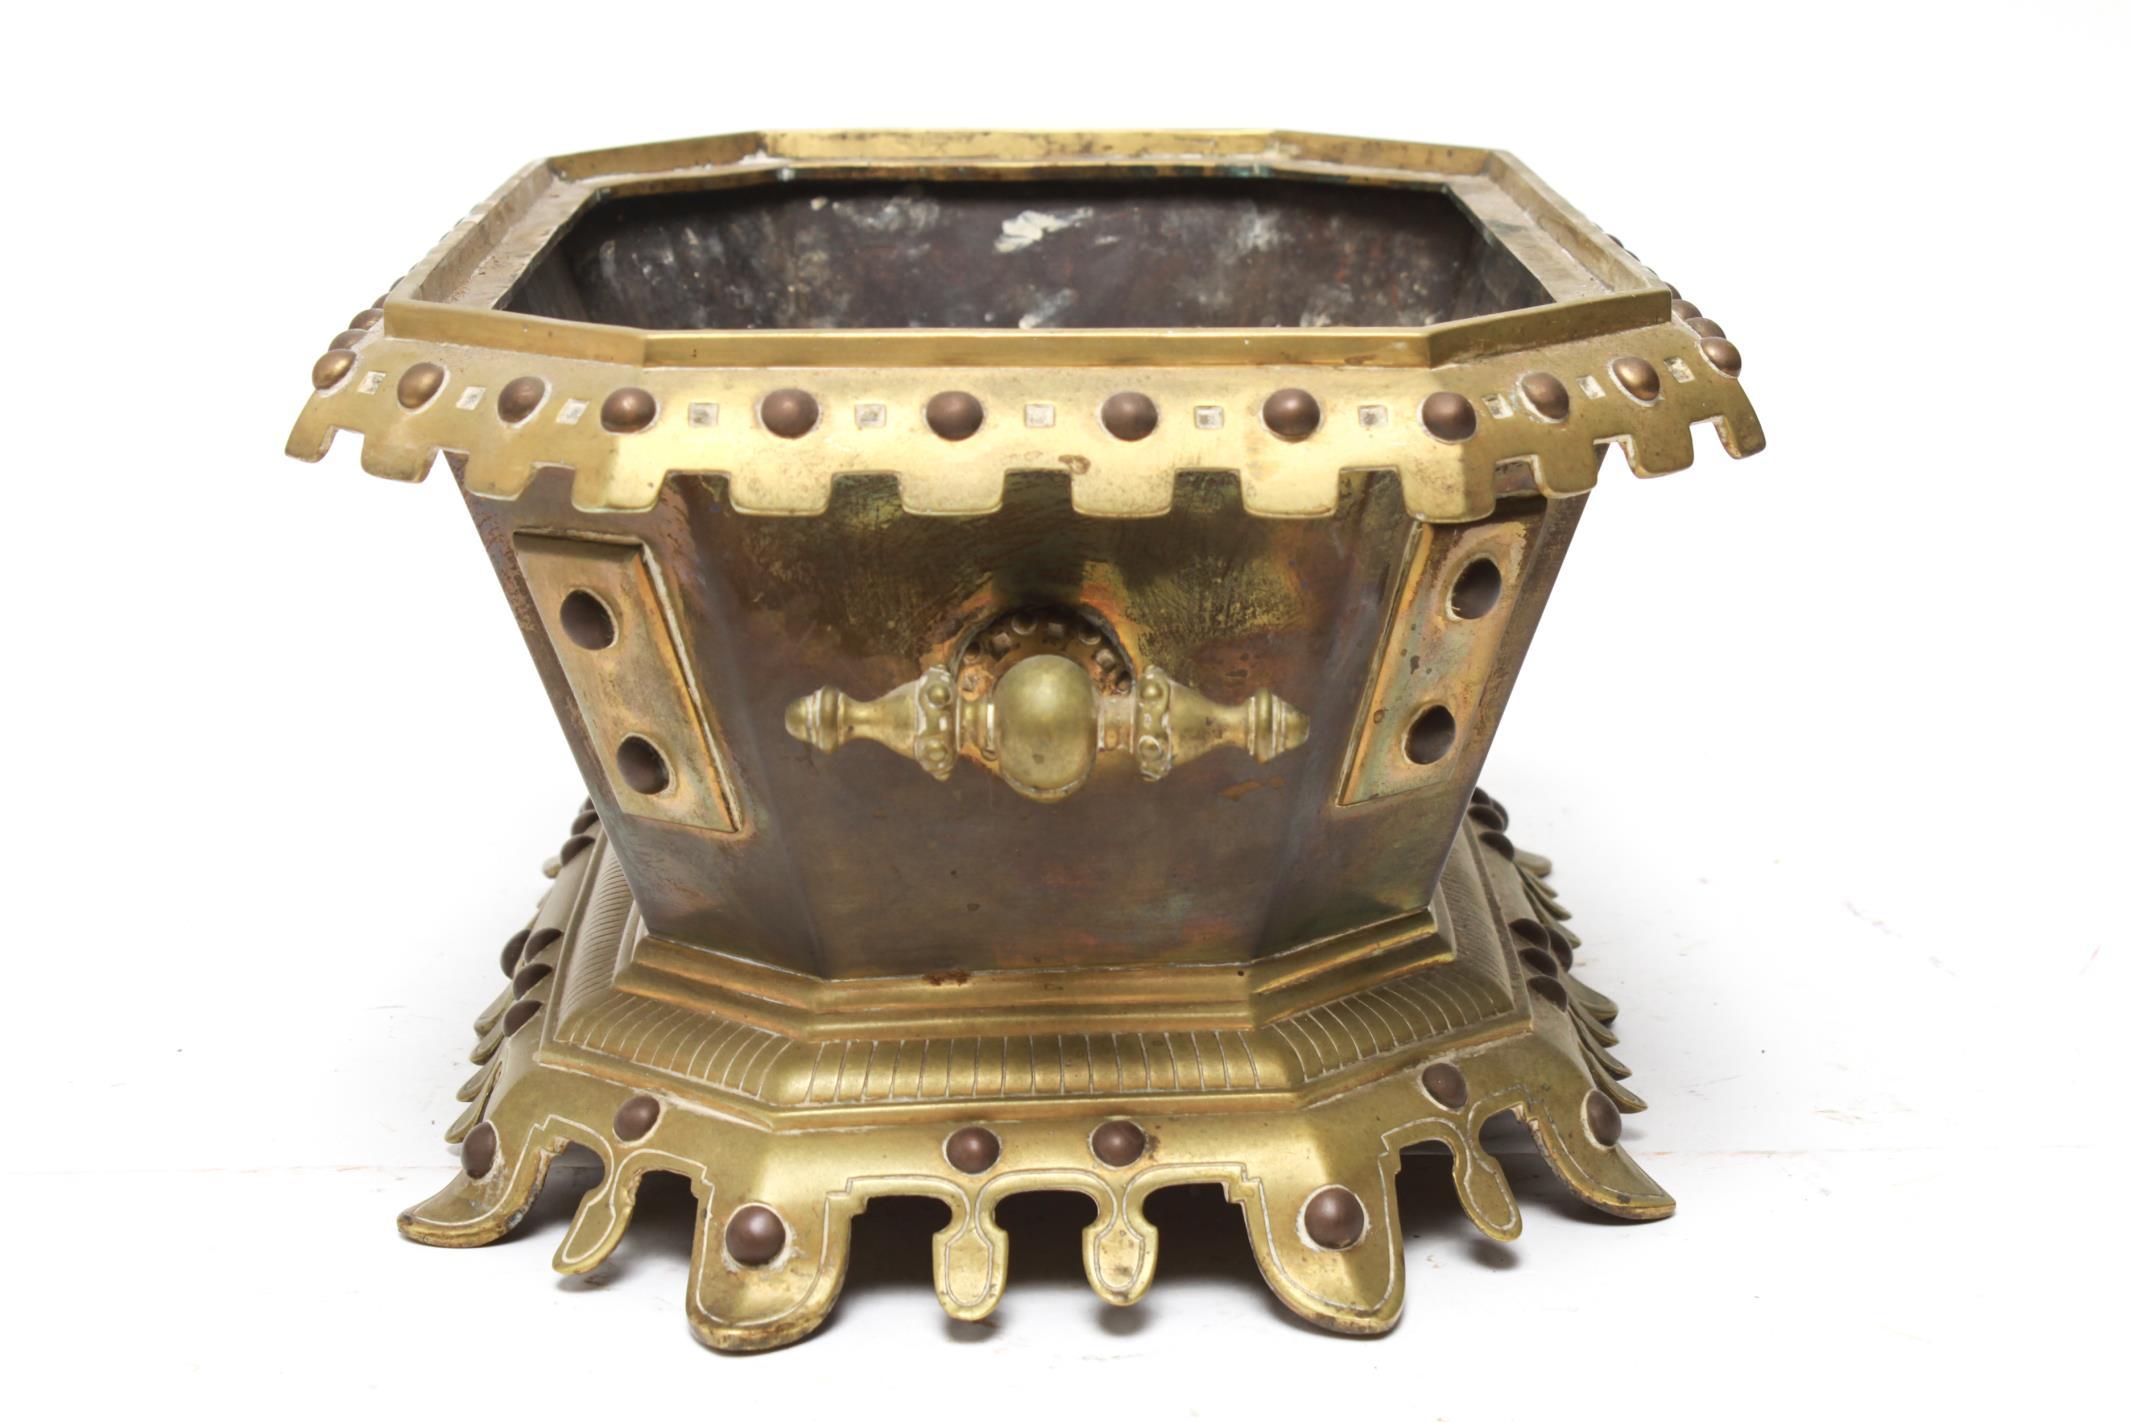 French neo-Gothic style jardinière in gilt bronze in an elongated hexagonal shape with applied metal panels and handles. The interior is lead-lined. Some age-appropriate wear and patina to the metal surfaces, but overall in great vintage condition.